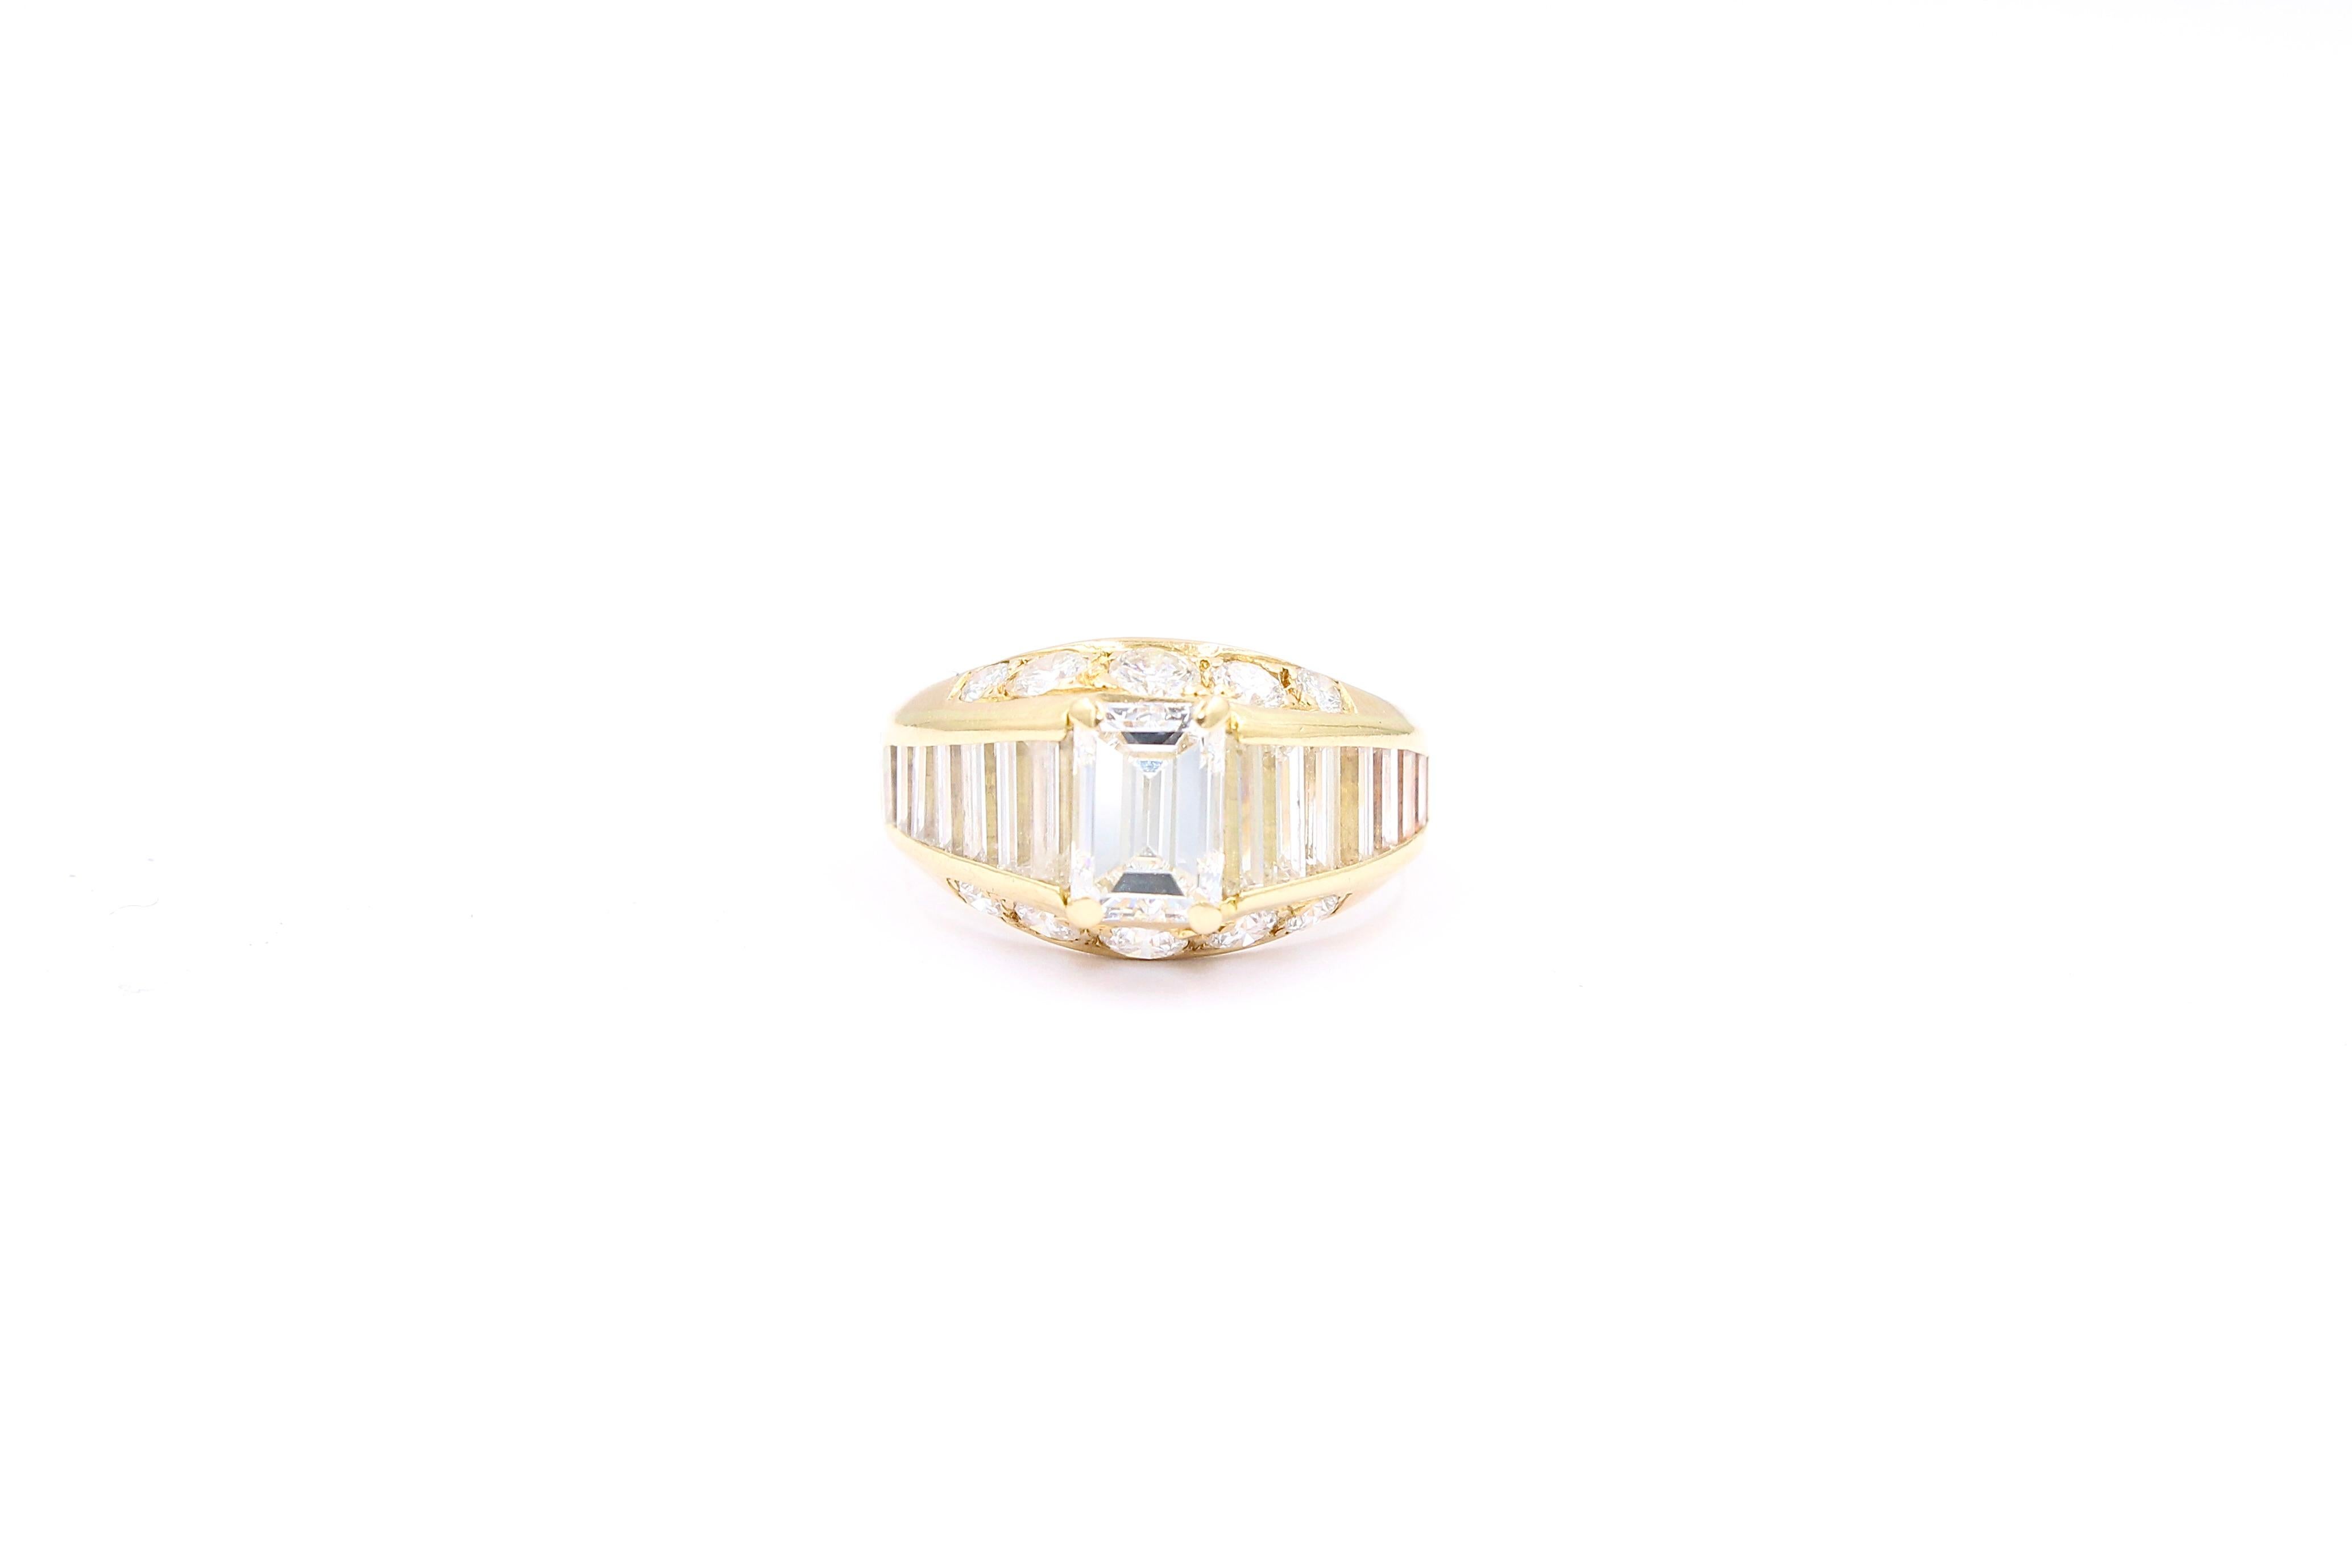 Vintage Ring made of Yellow gold 18 Kt. and diamonds. 

The ring is set with a center emerald cut diamond of approximately 1.00 Carats (IGI Certified colorless color/ E-F - VS1 purity), 10 full cut diamonds for a total of approximately 0.50 Carats